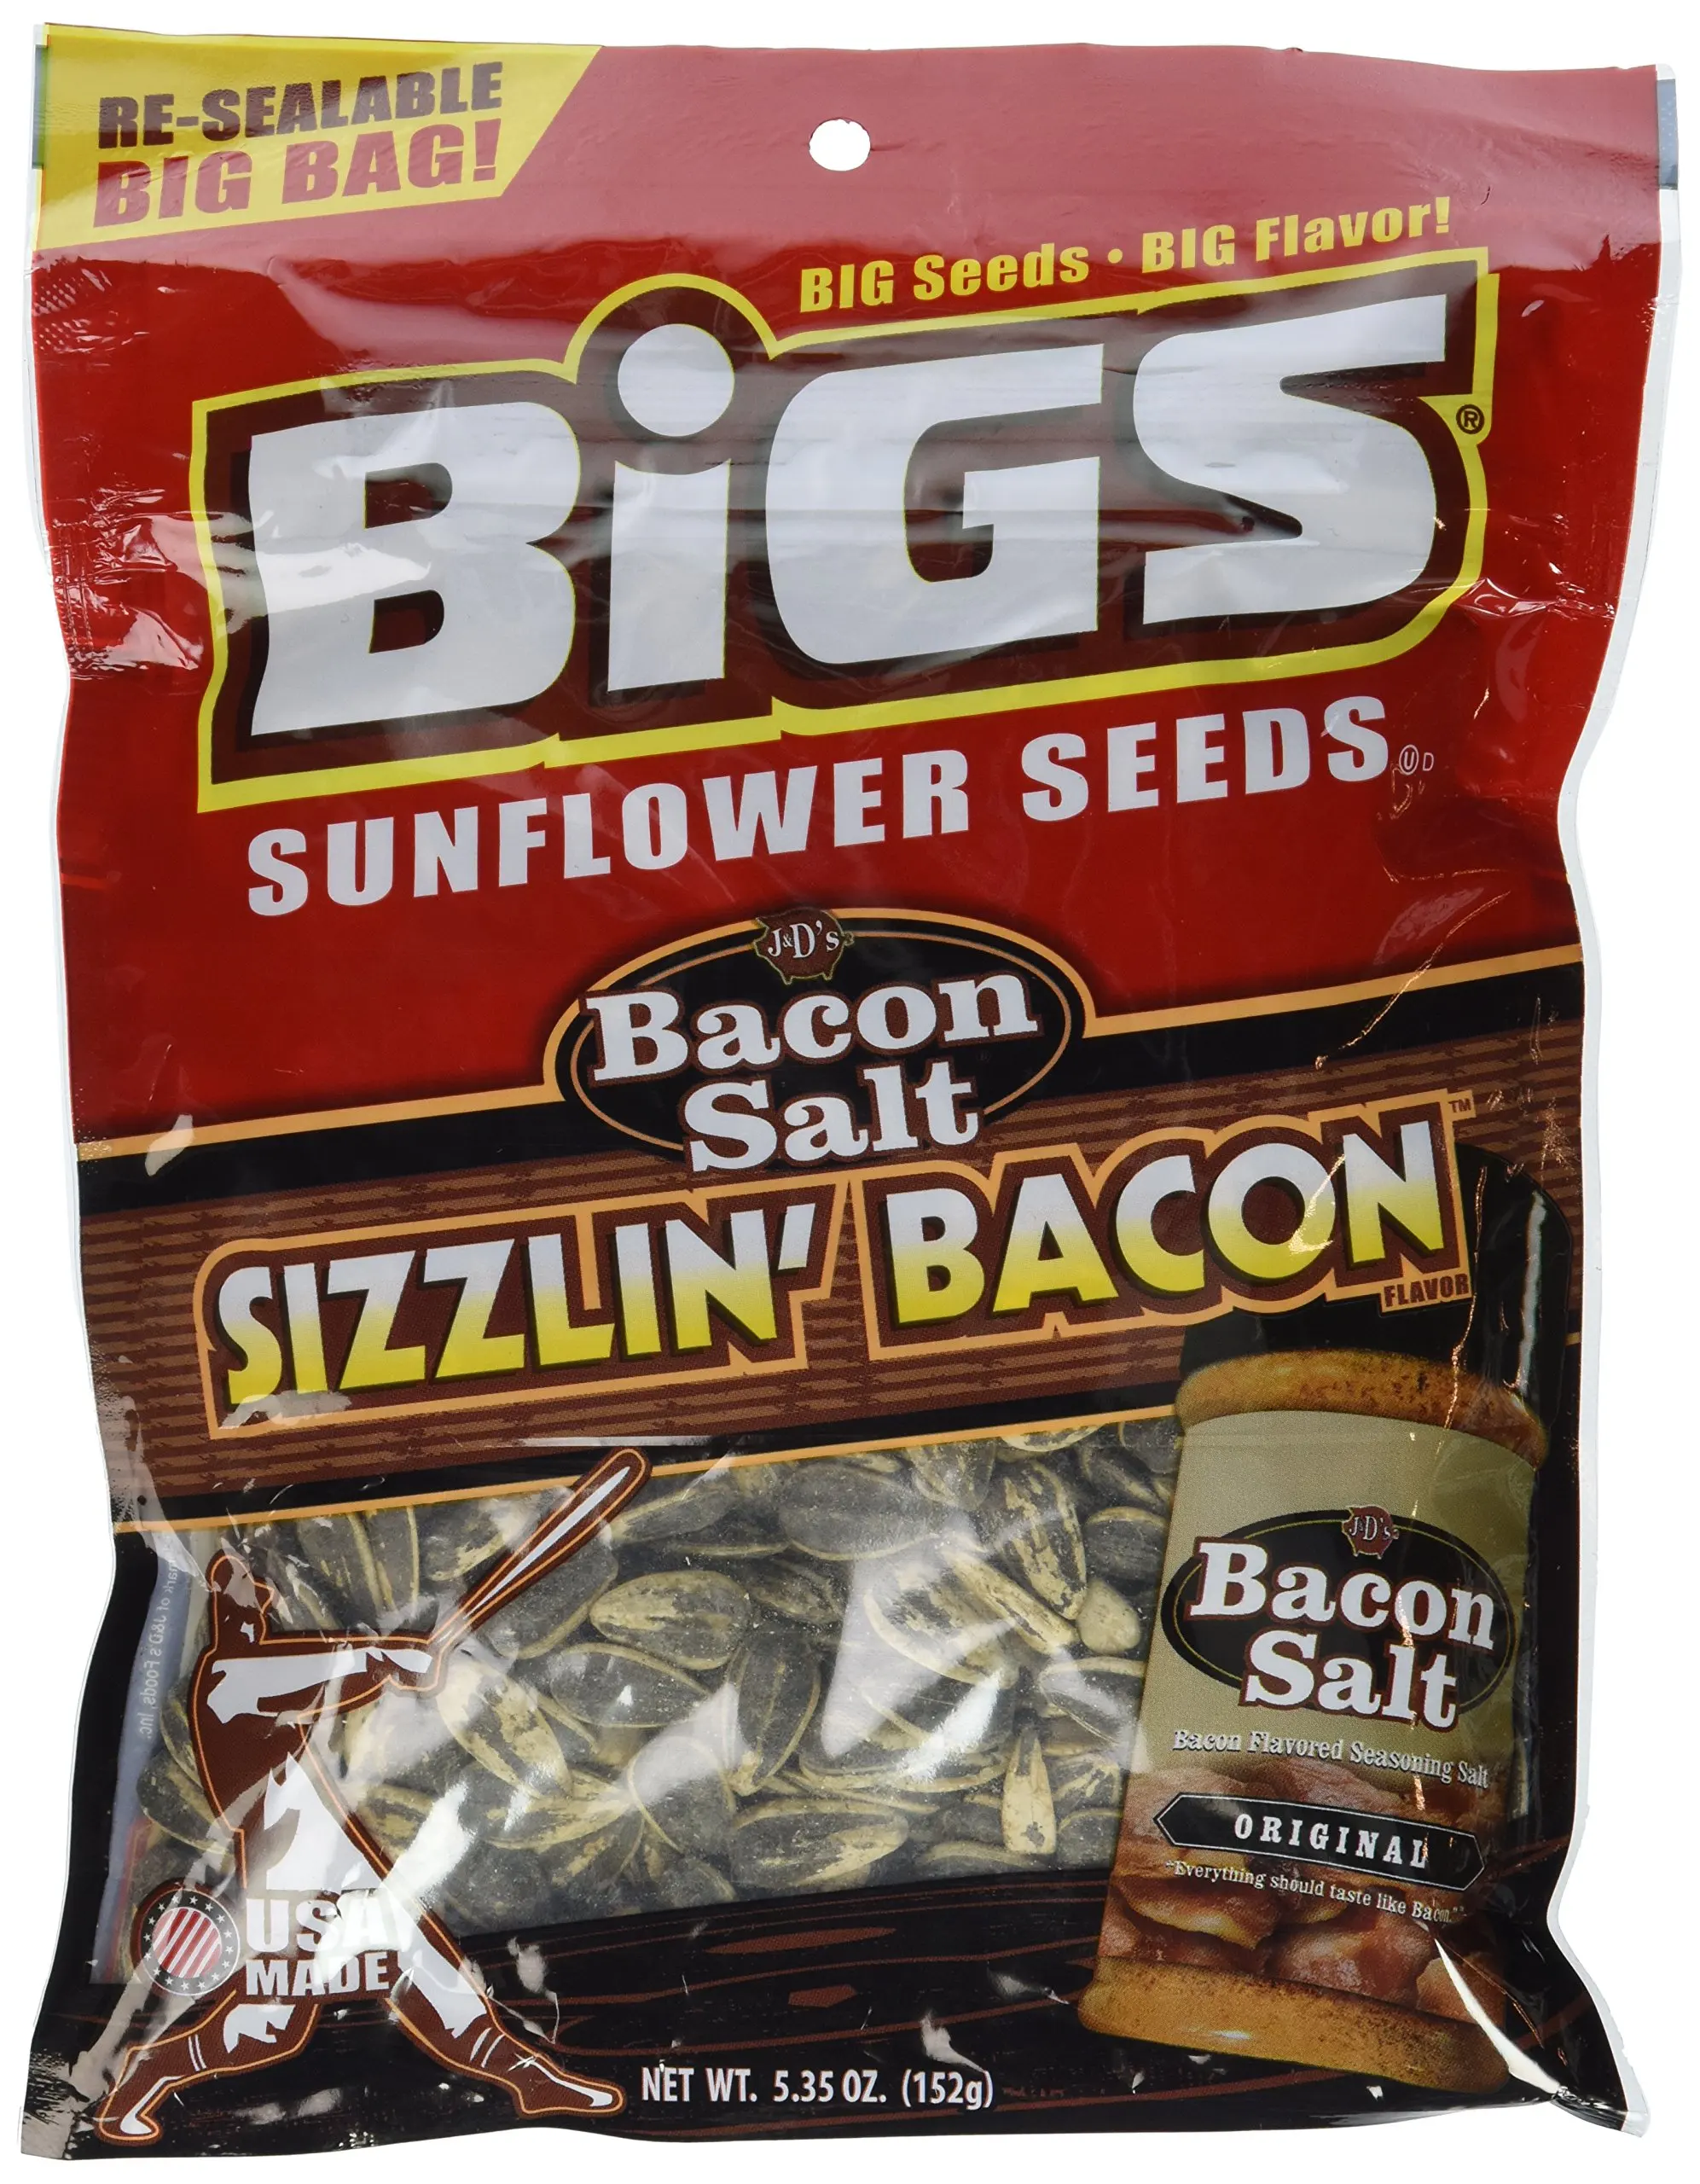 Bigs Sunflower Seeds (Pack of 2) (Bacon Salt Sizzlin Bacon). 